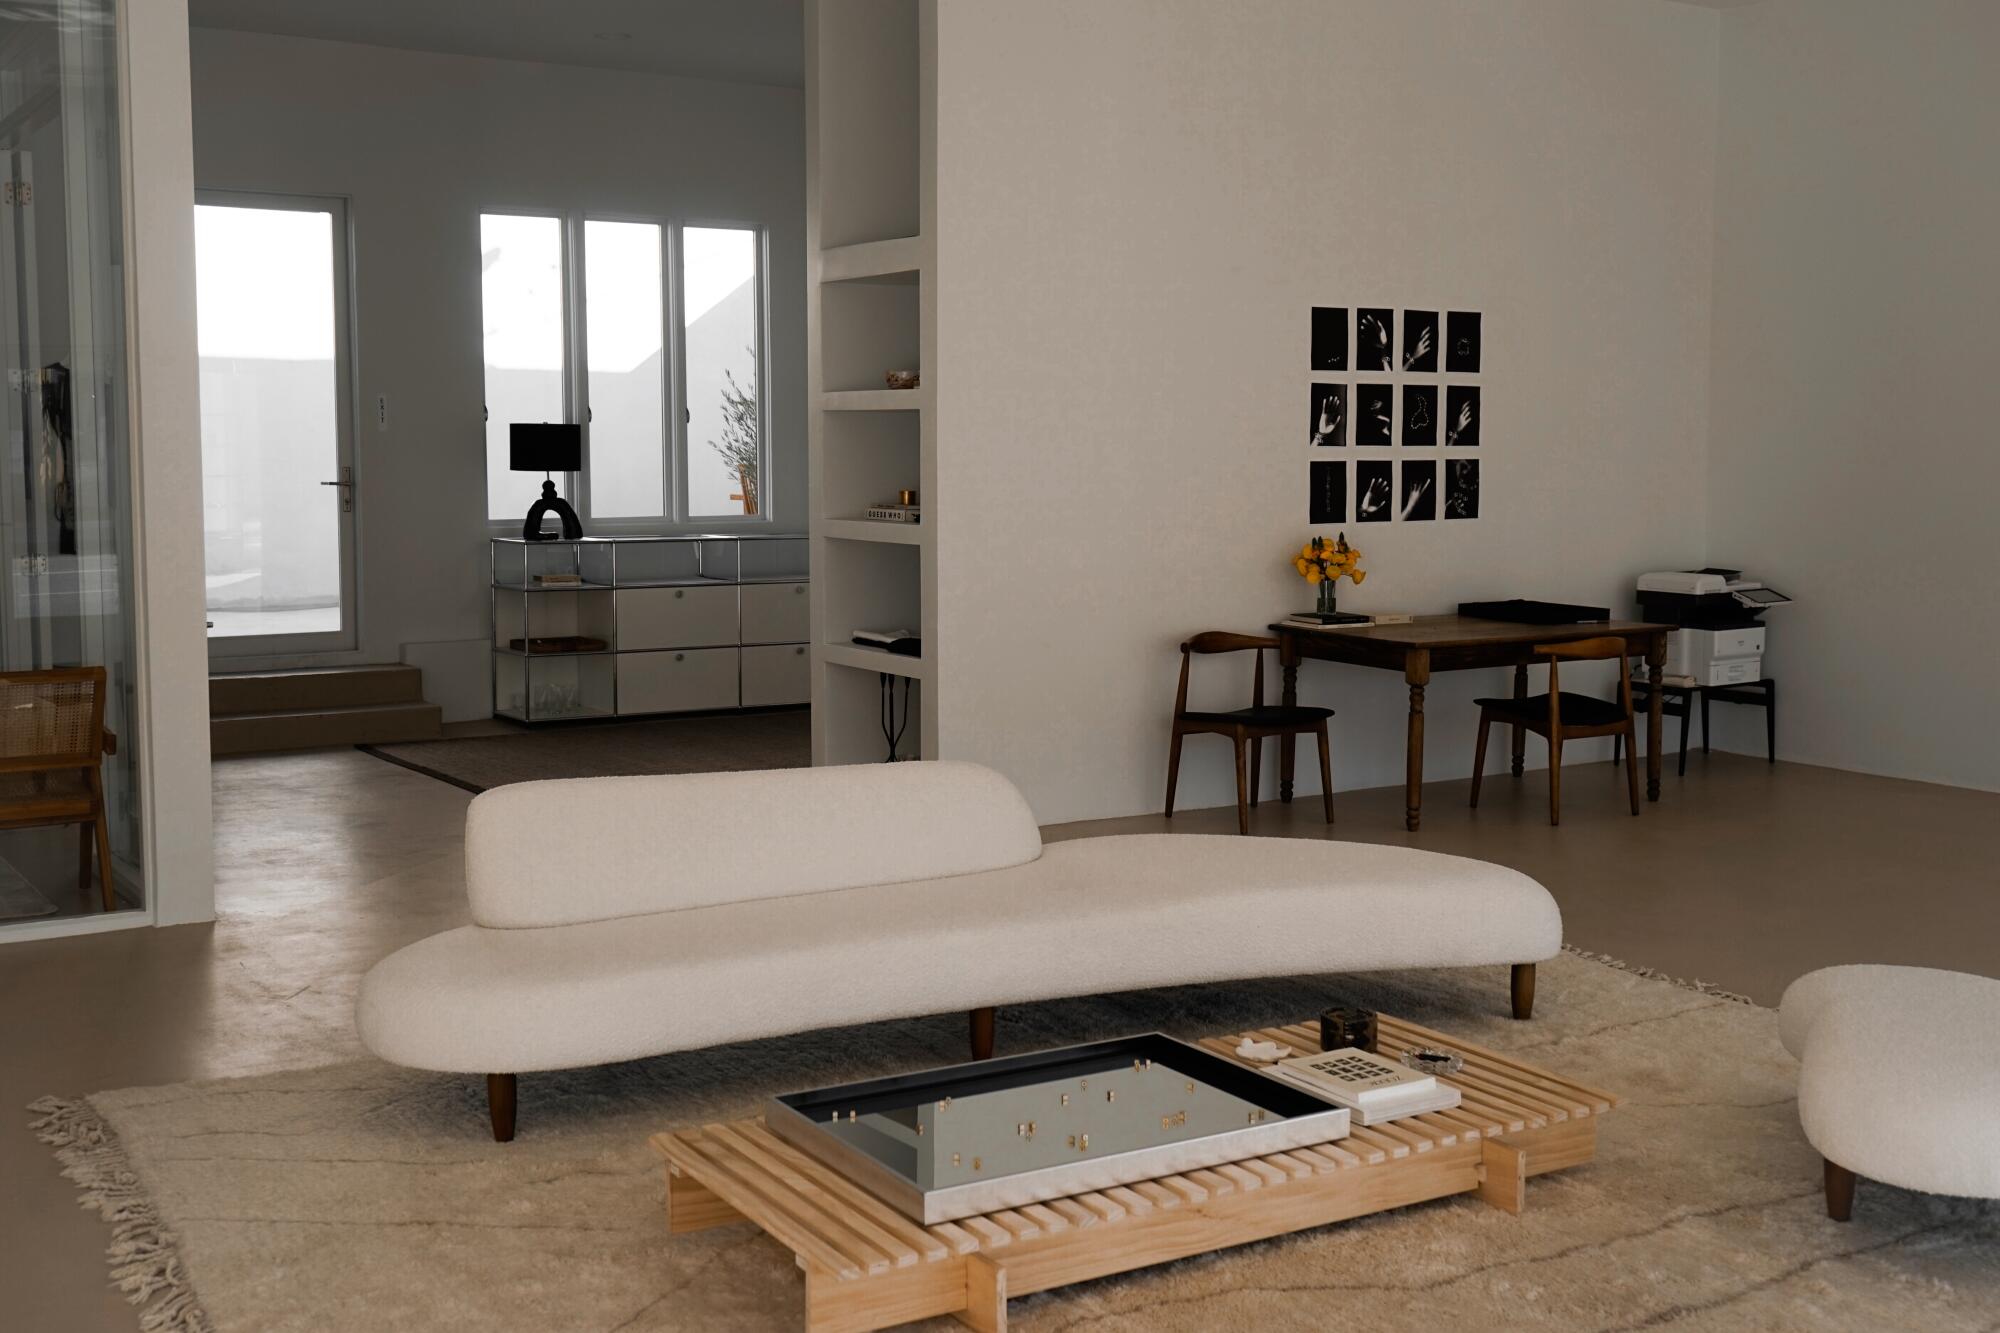 A white biomorphic couch and low wooden table inside Tase Gallery